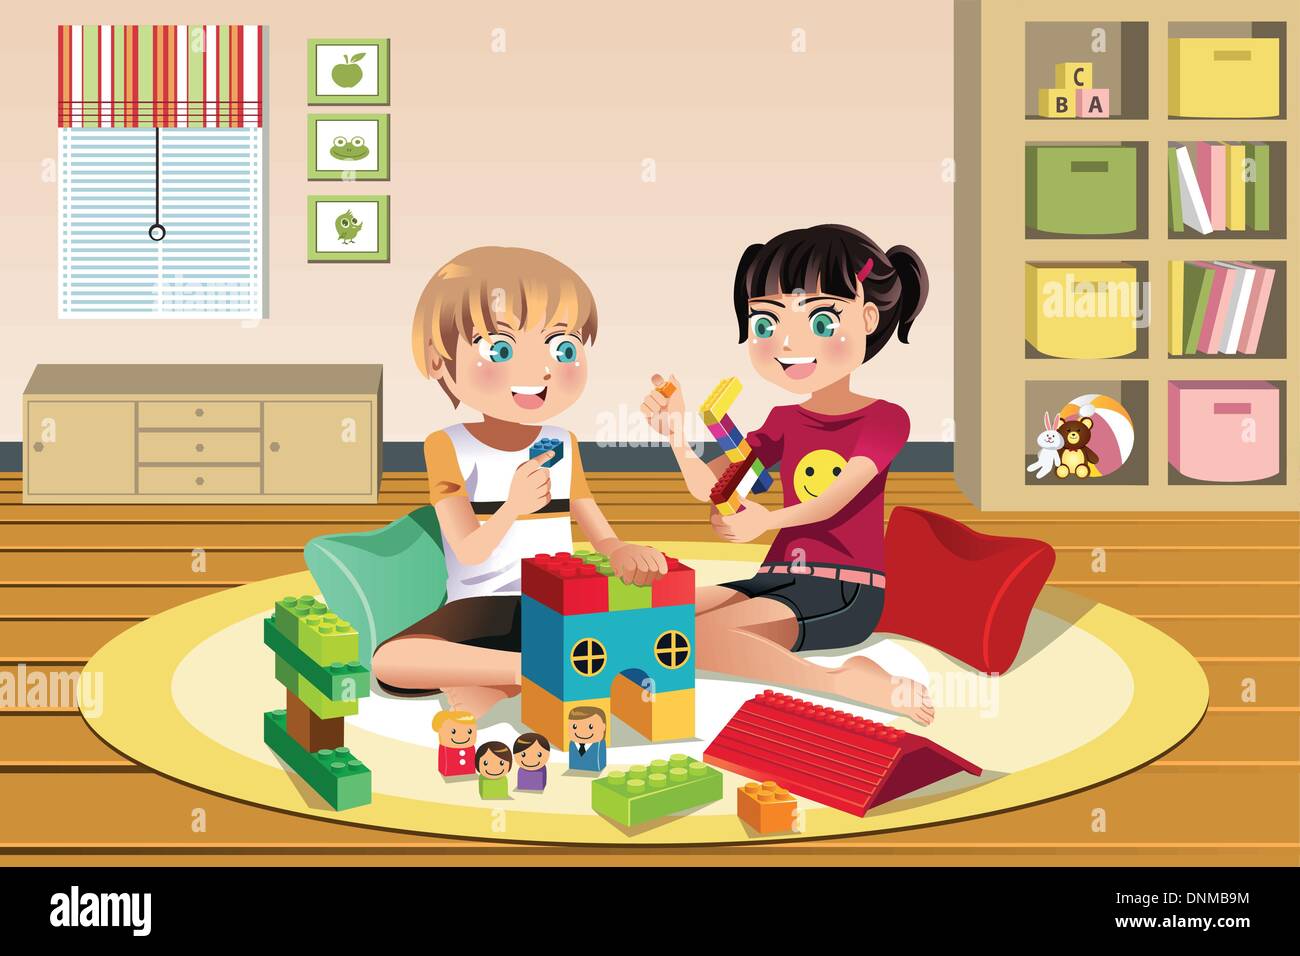 https://c8.alamy.com/comp/DNMB9M/a-vector-illustration-of-happy-kids-playing-toys-together-DNMB9M.jpg